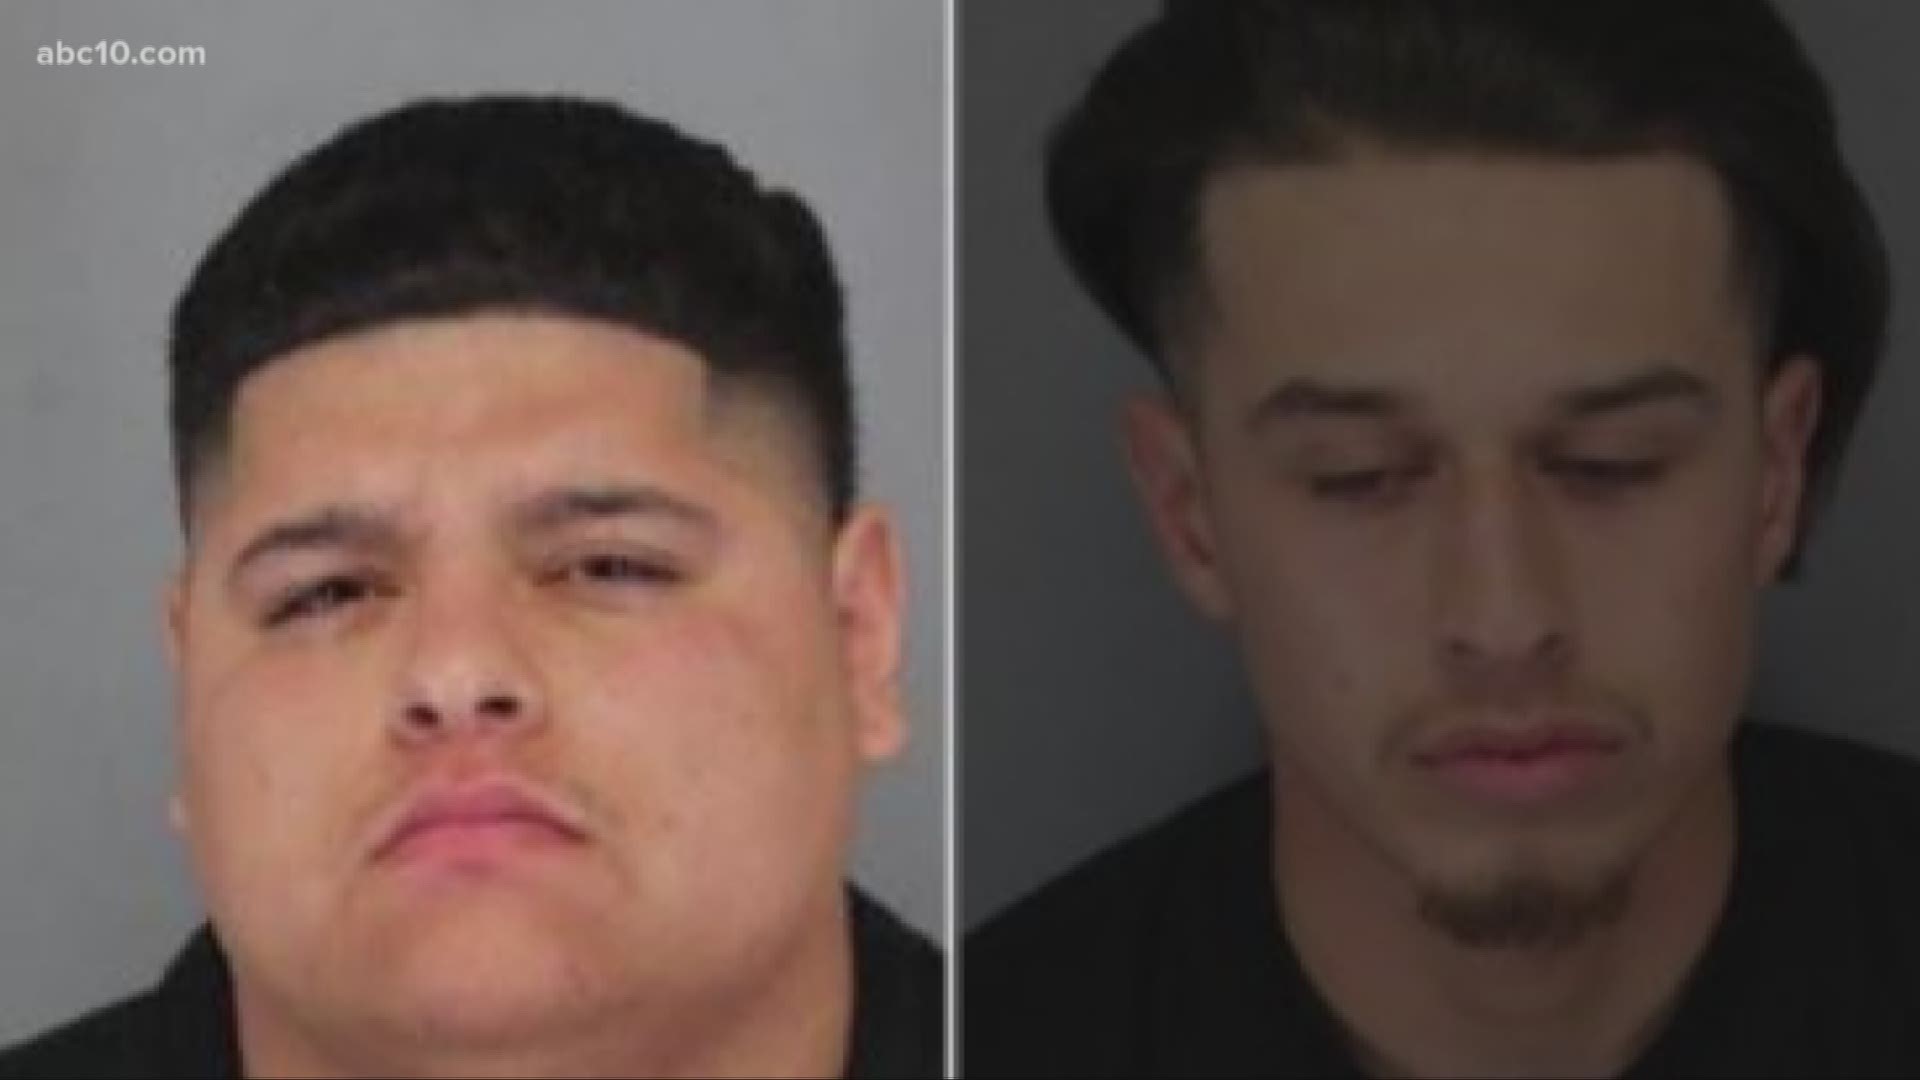 Two men have been arrested after another man was killed during a shooting at a Lodi In-N-Out Burger late Saturday night, according to the Lodi Police Department.